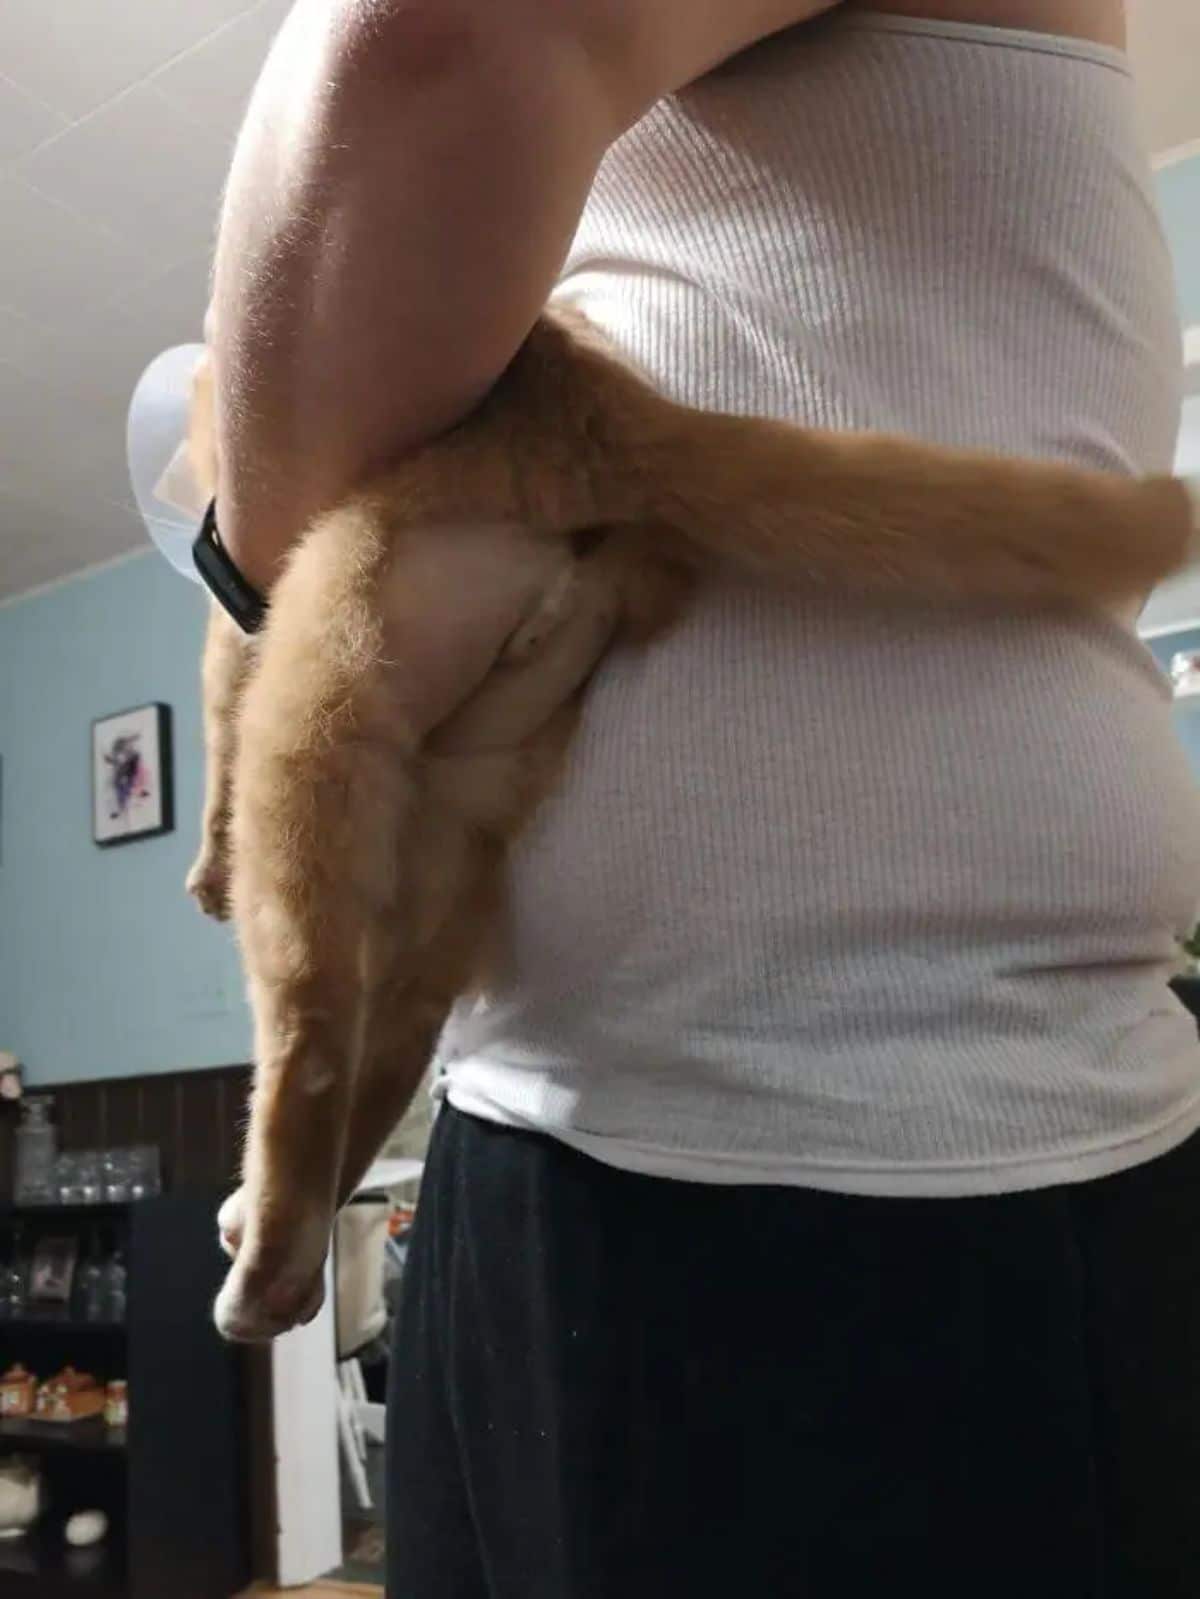 orange cat being held by someone and the cat has the butt shaved